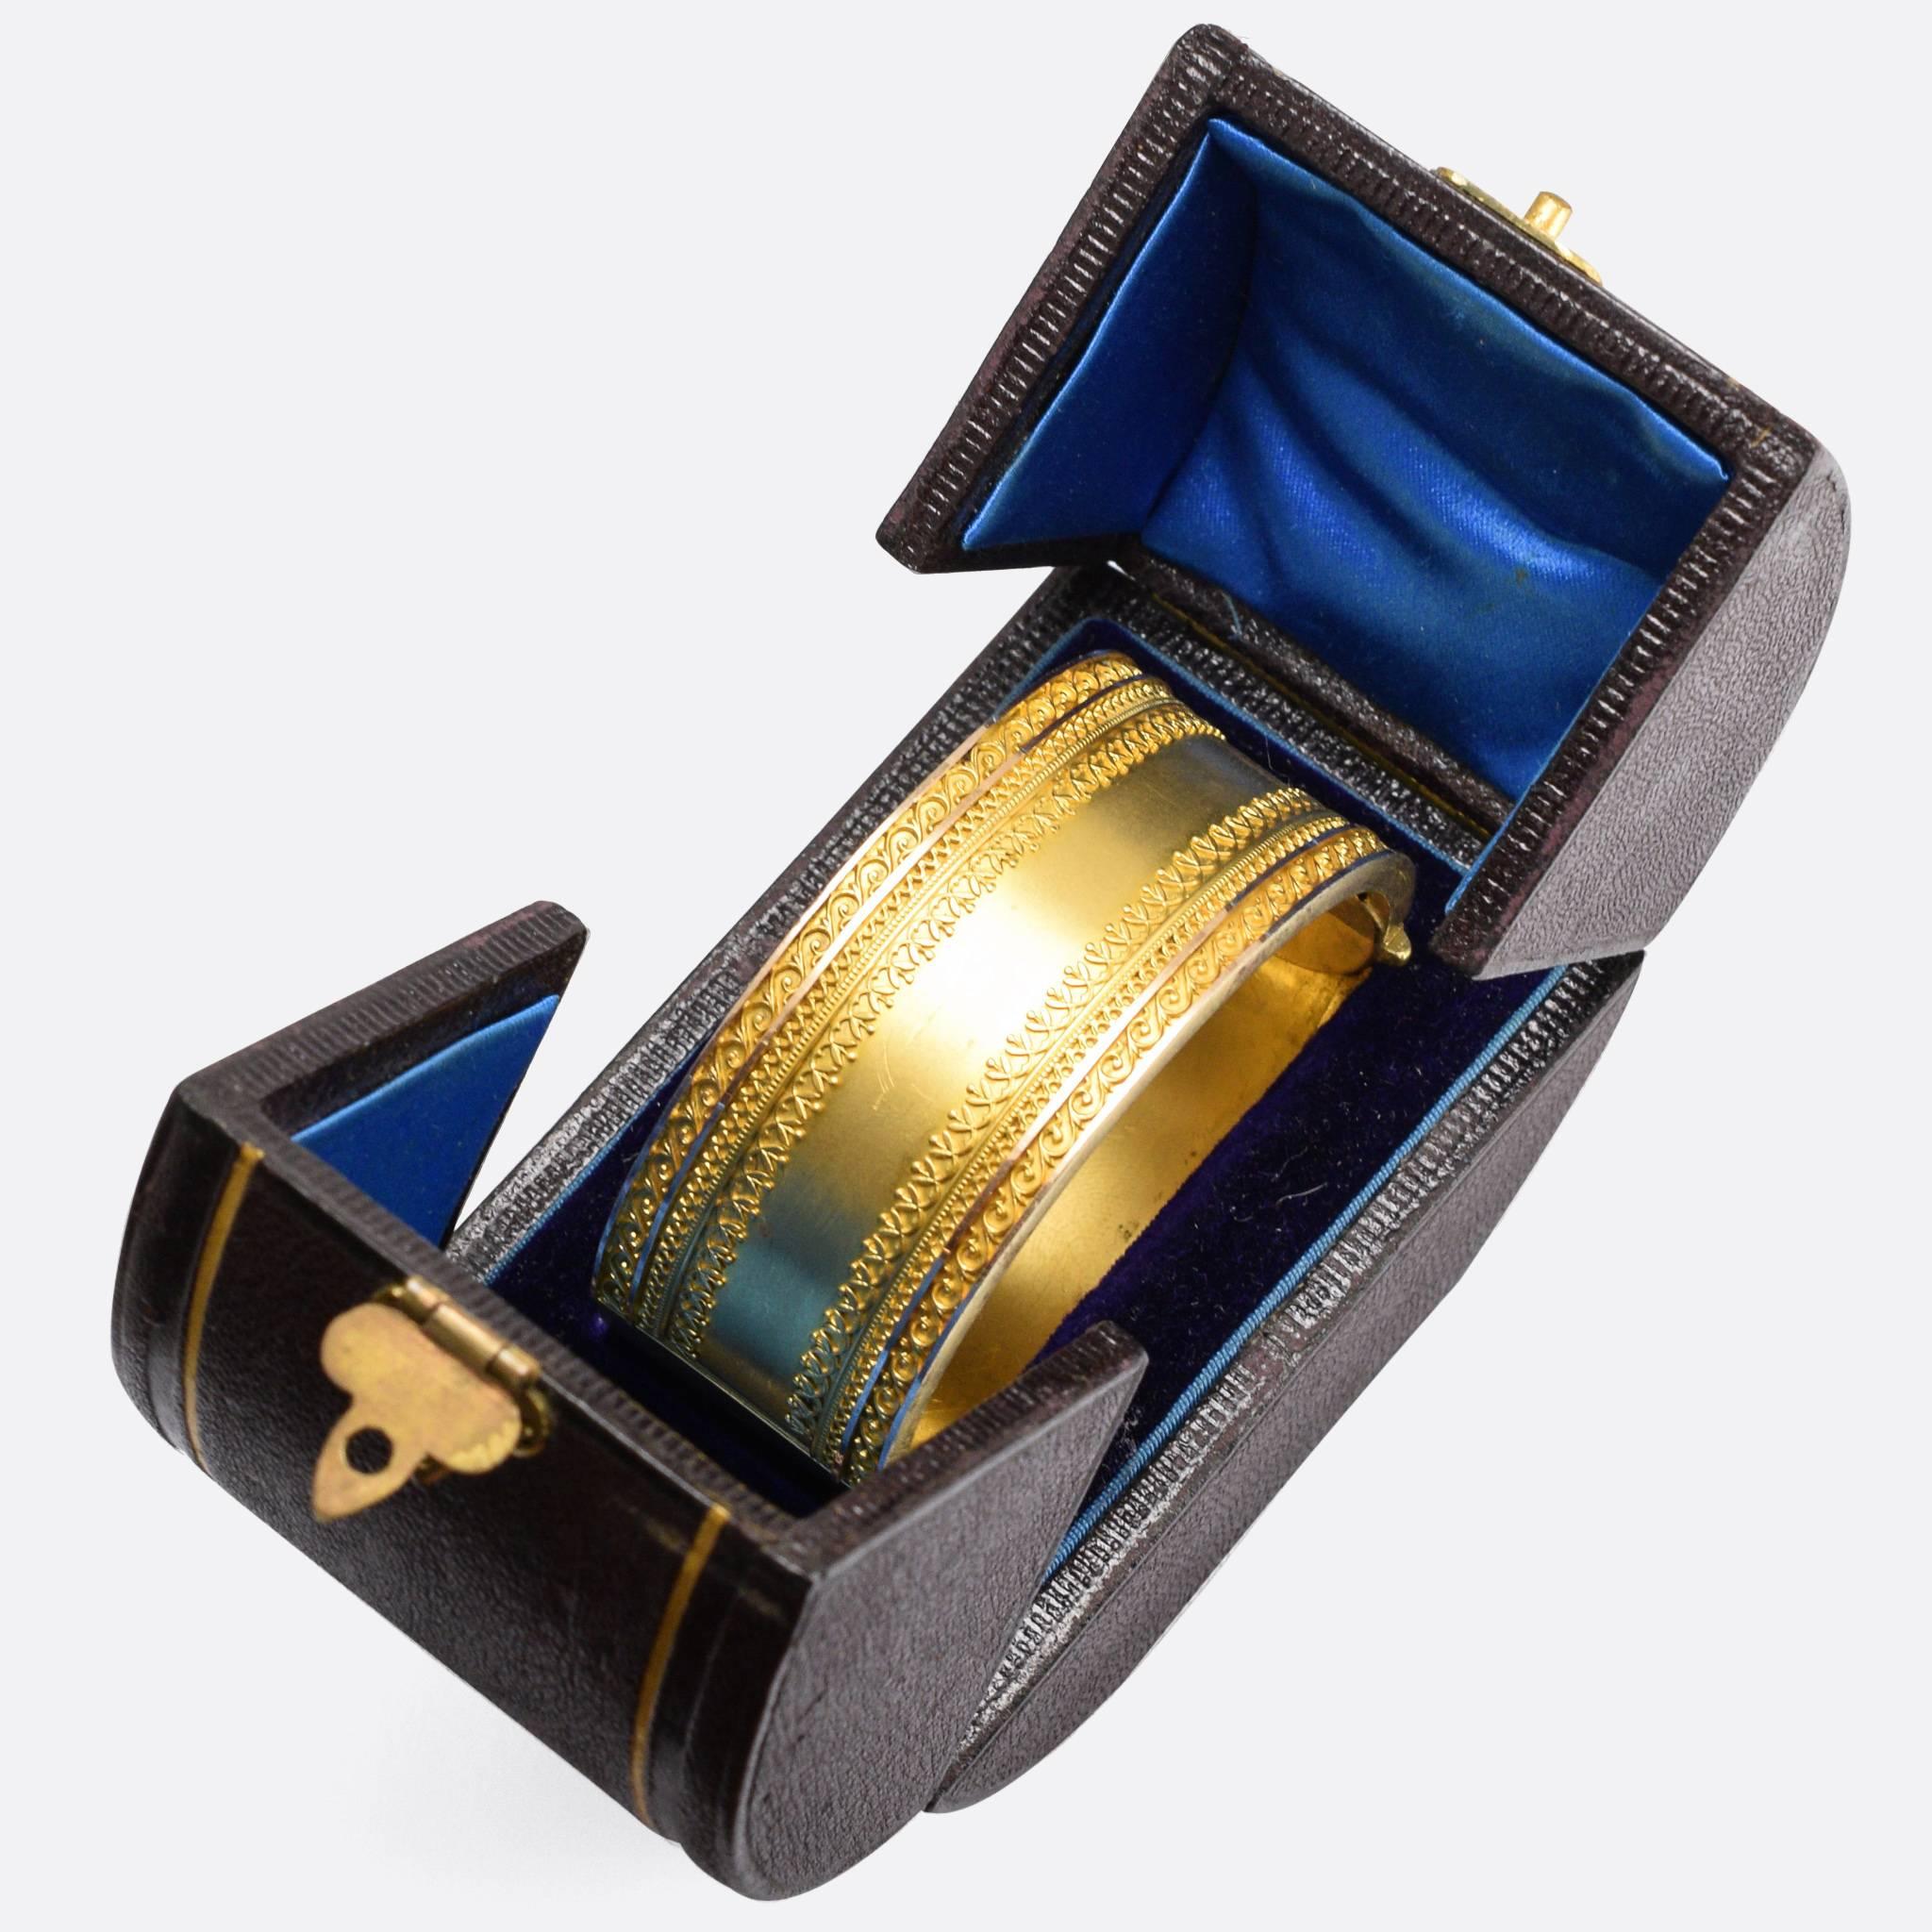 The most wonderful Etruscan Revival bangel, modelled in 15k gold and paired with it's original (delightful) presentation box. The bangle features exquisite applied goldwork and two rose gold lines run parallel along each edge. It dates to